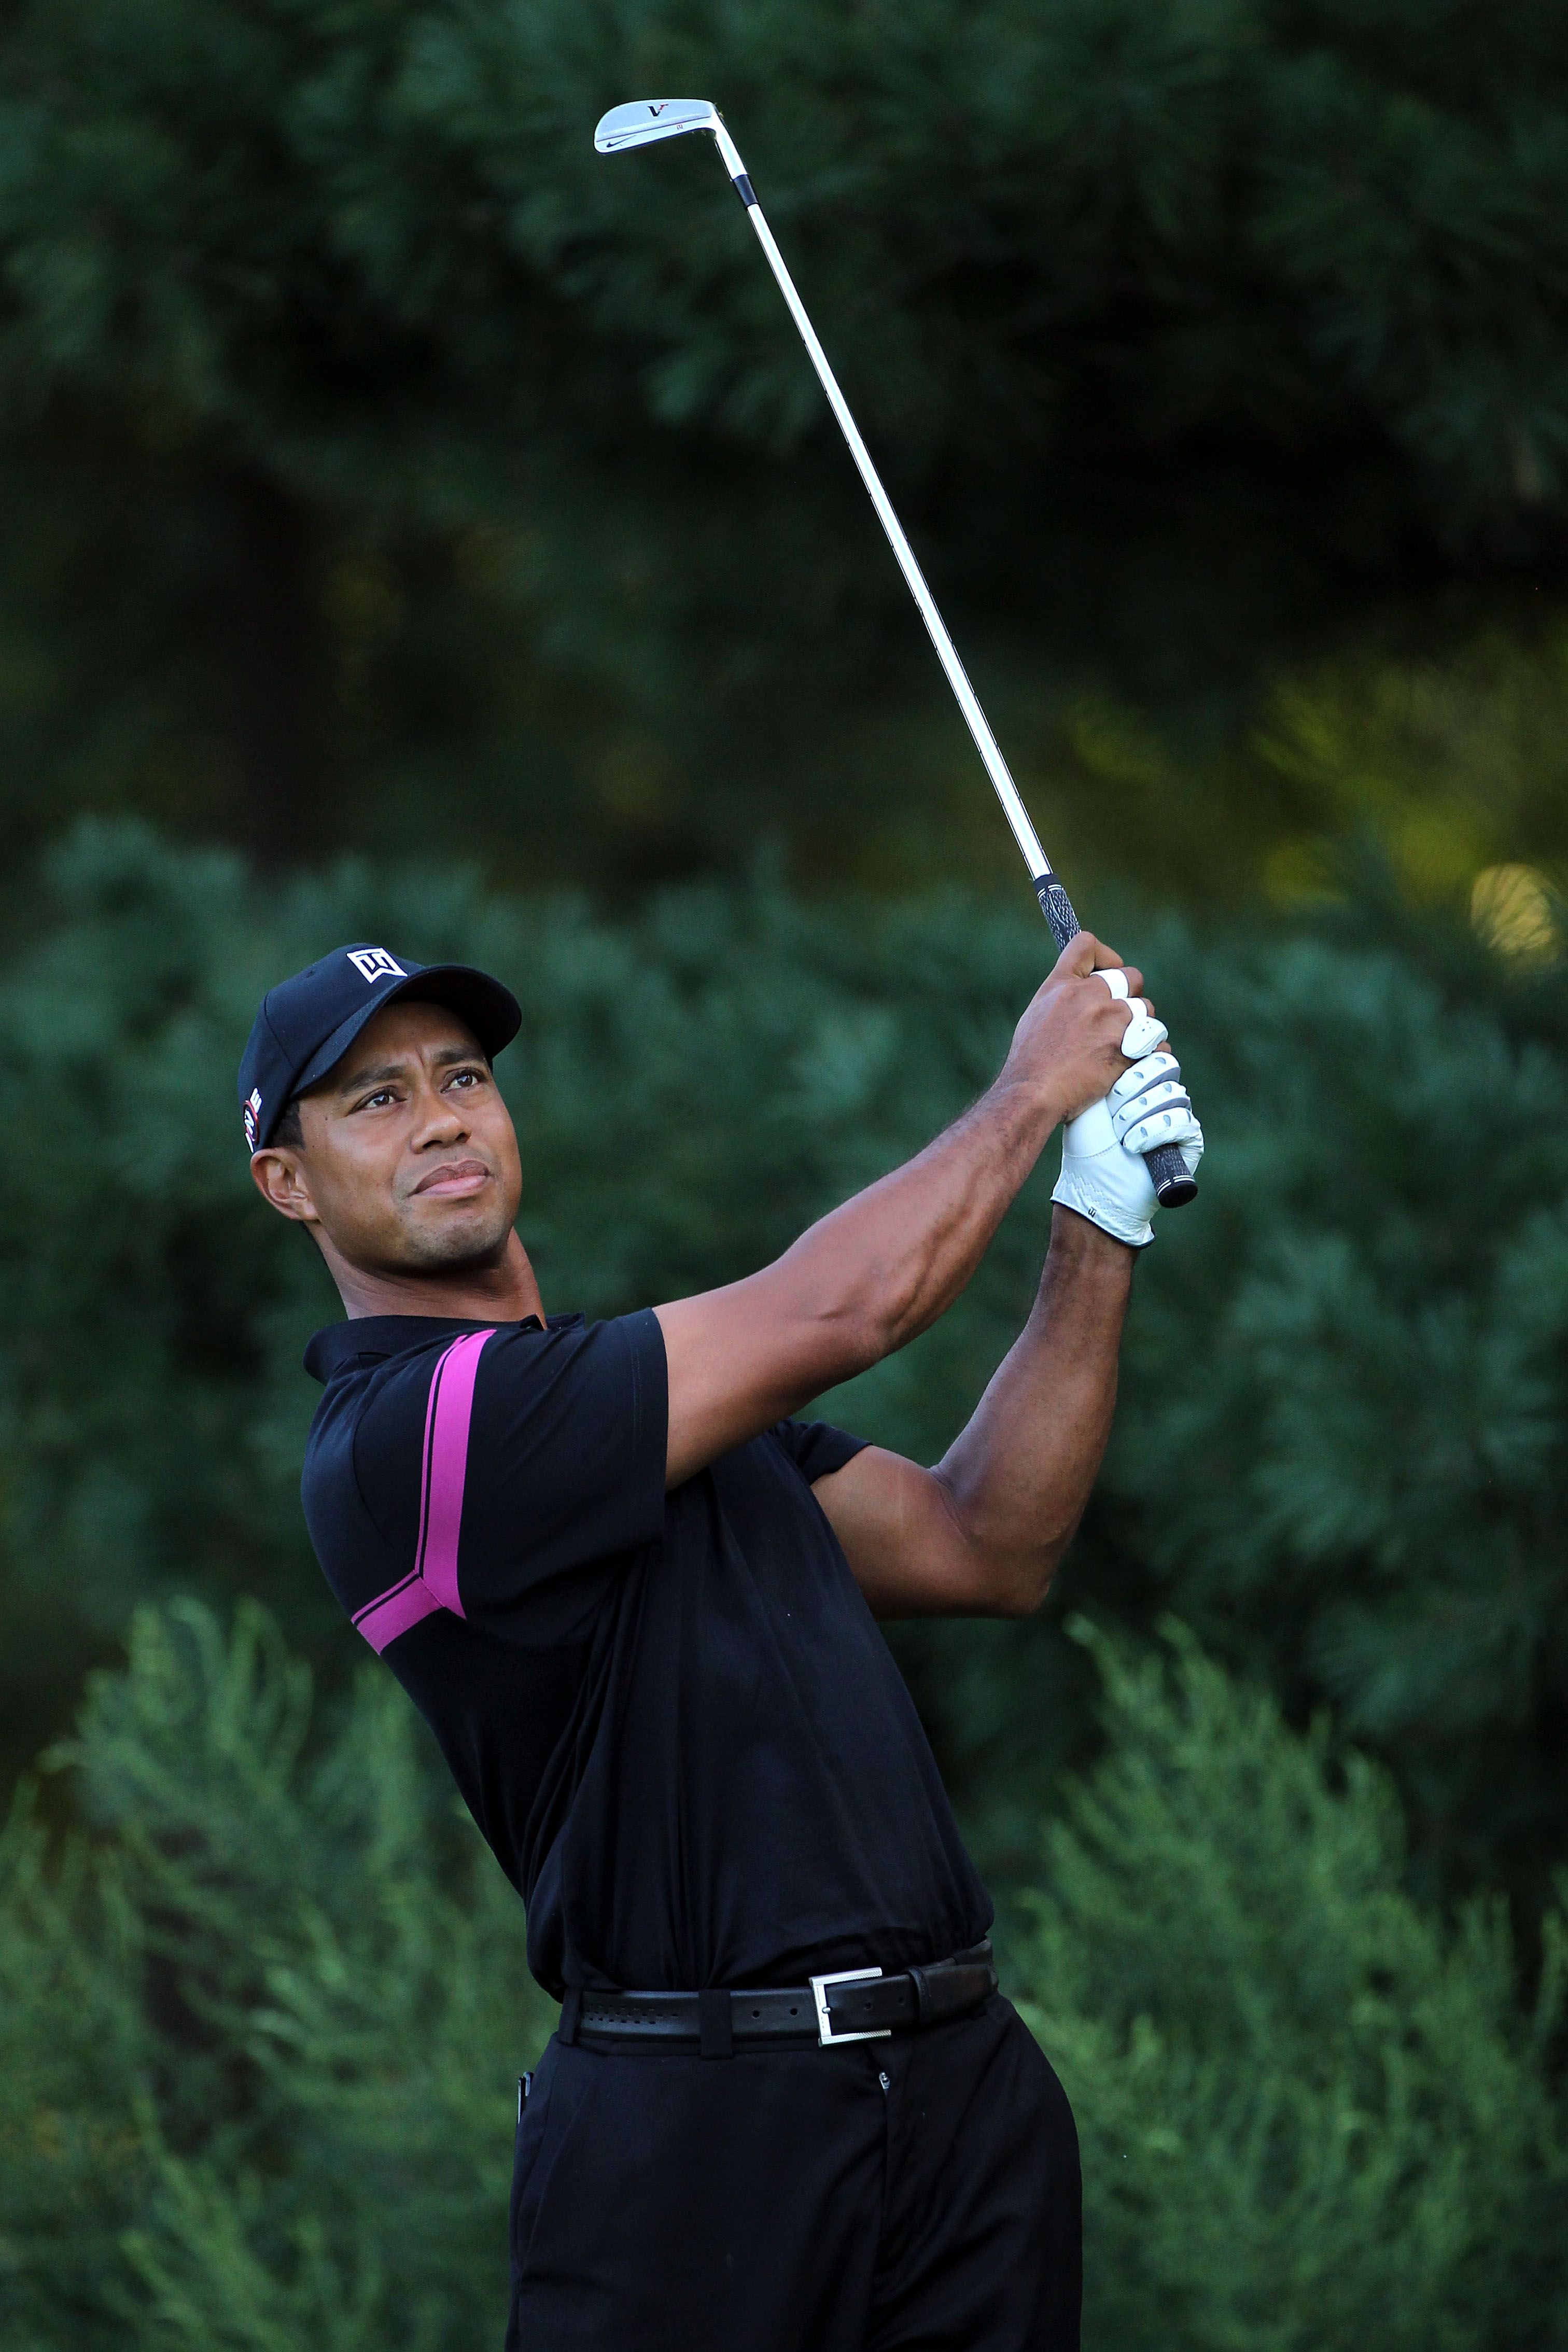 PARAMUS, NJ - AUGUST 26:  Tiger Woods watches his tee shot on the second hole during the first round of The Barclays at the Ridgewood Country Club on August 26, 2010 in Paramus, New Jersey.  (Photo by Hunter Martin/Getty Images)